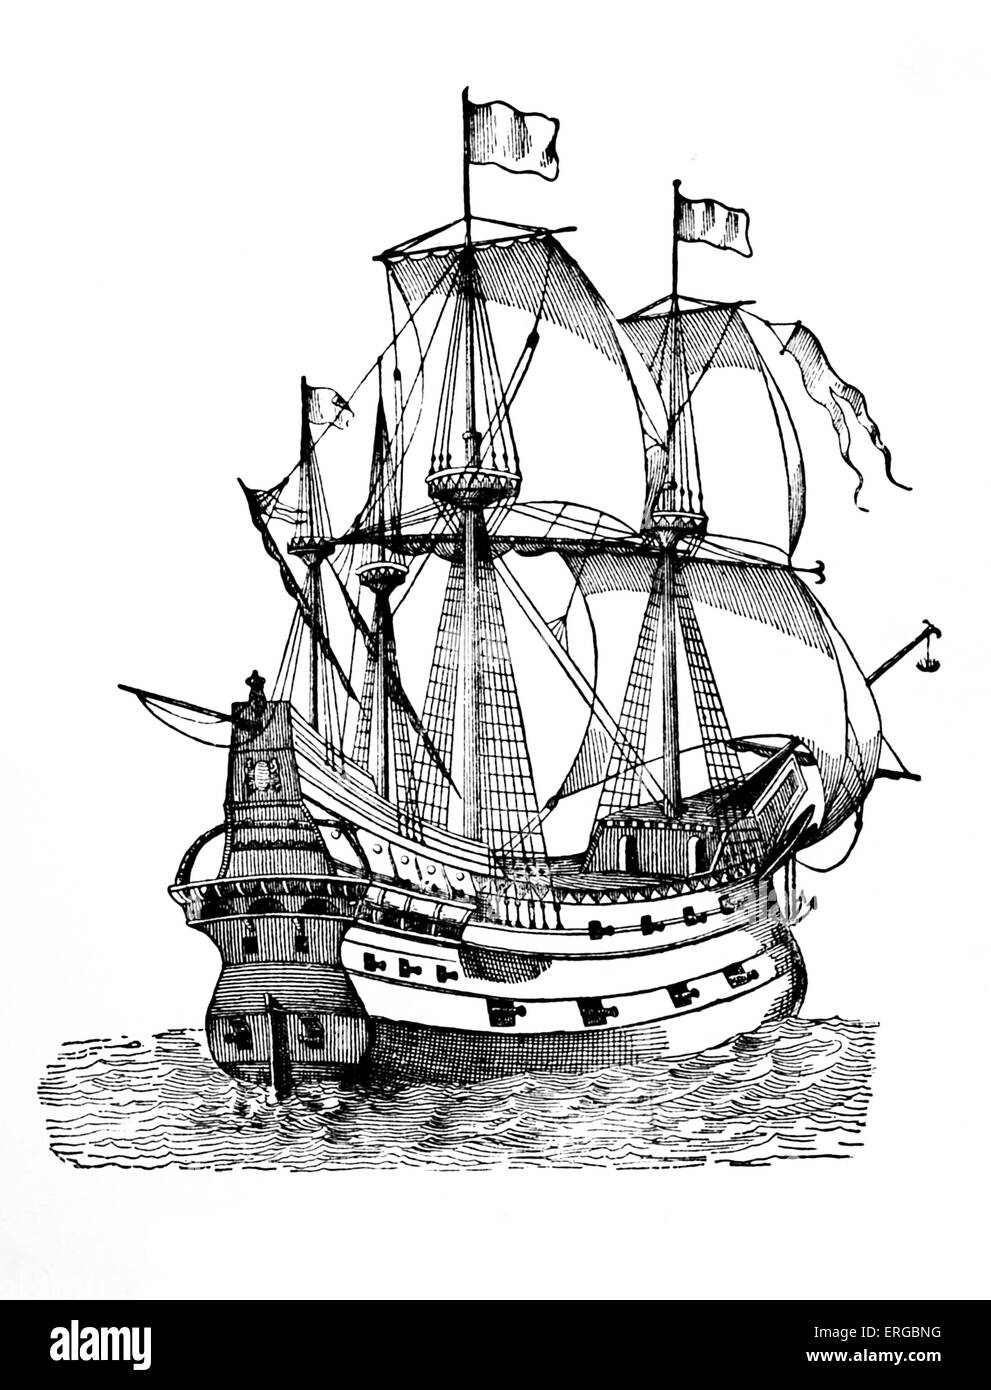 Galleon - 15th century. Ship used by pirates. Stock Photo